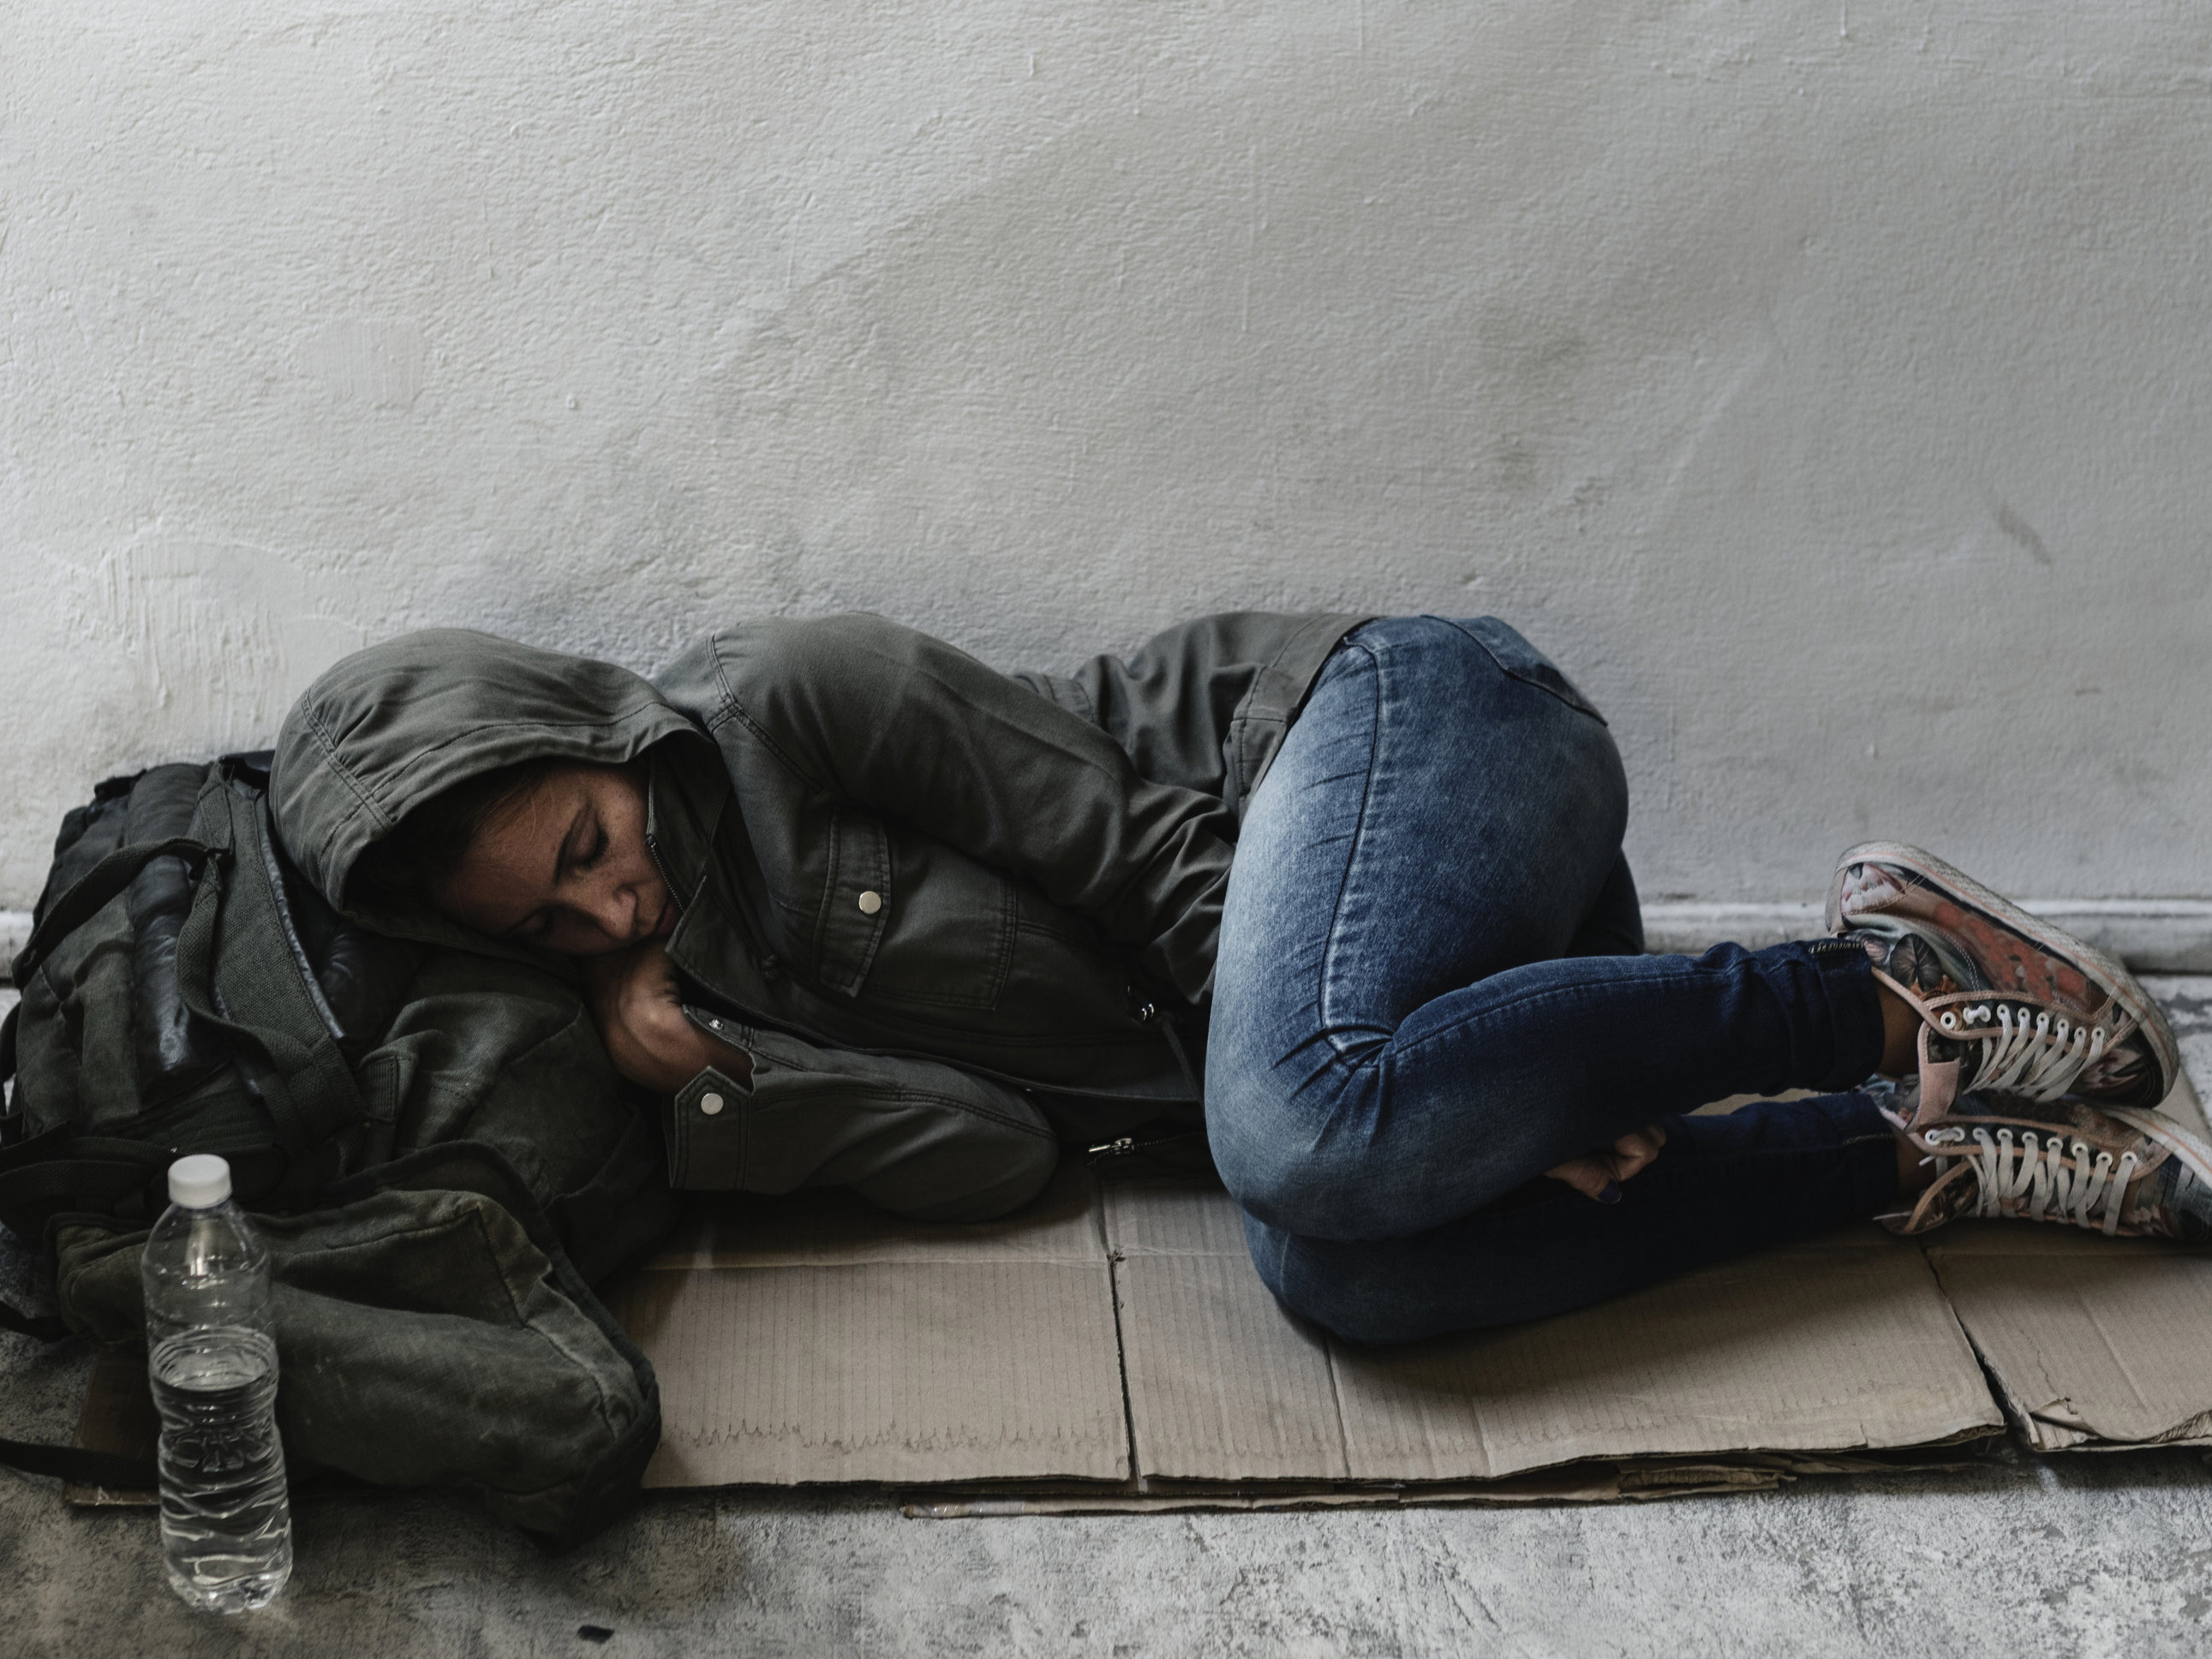 Homeless women are particularly vulnerable to gendered violence. Image: shutterstock.com
